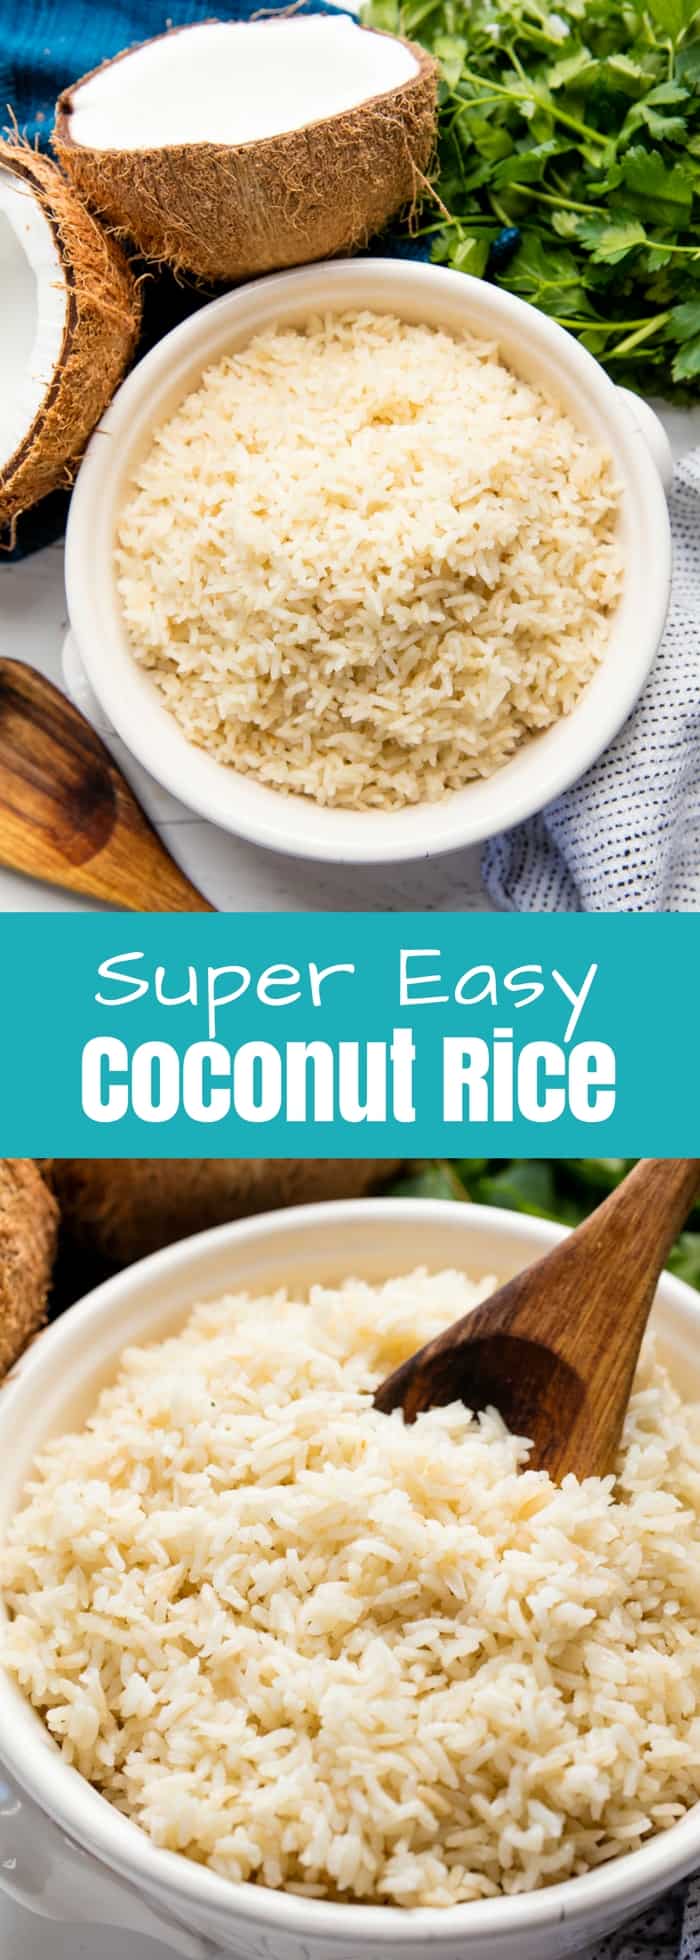 Coconut Rice is easy to make and the perfect side dish for so many different styles of meals. It has a mild coconut flavor, but it's still delicious!